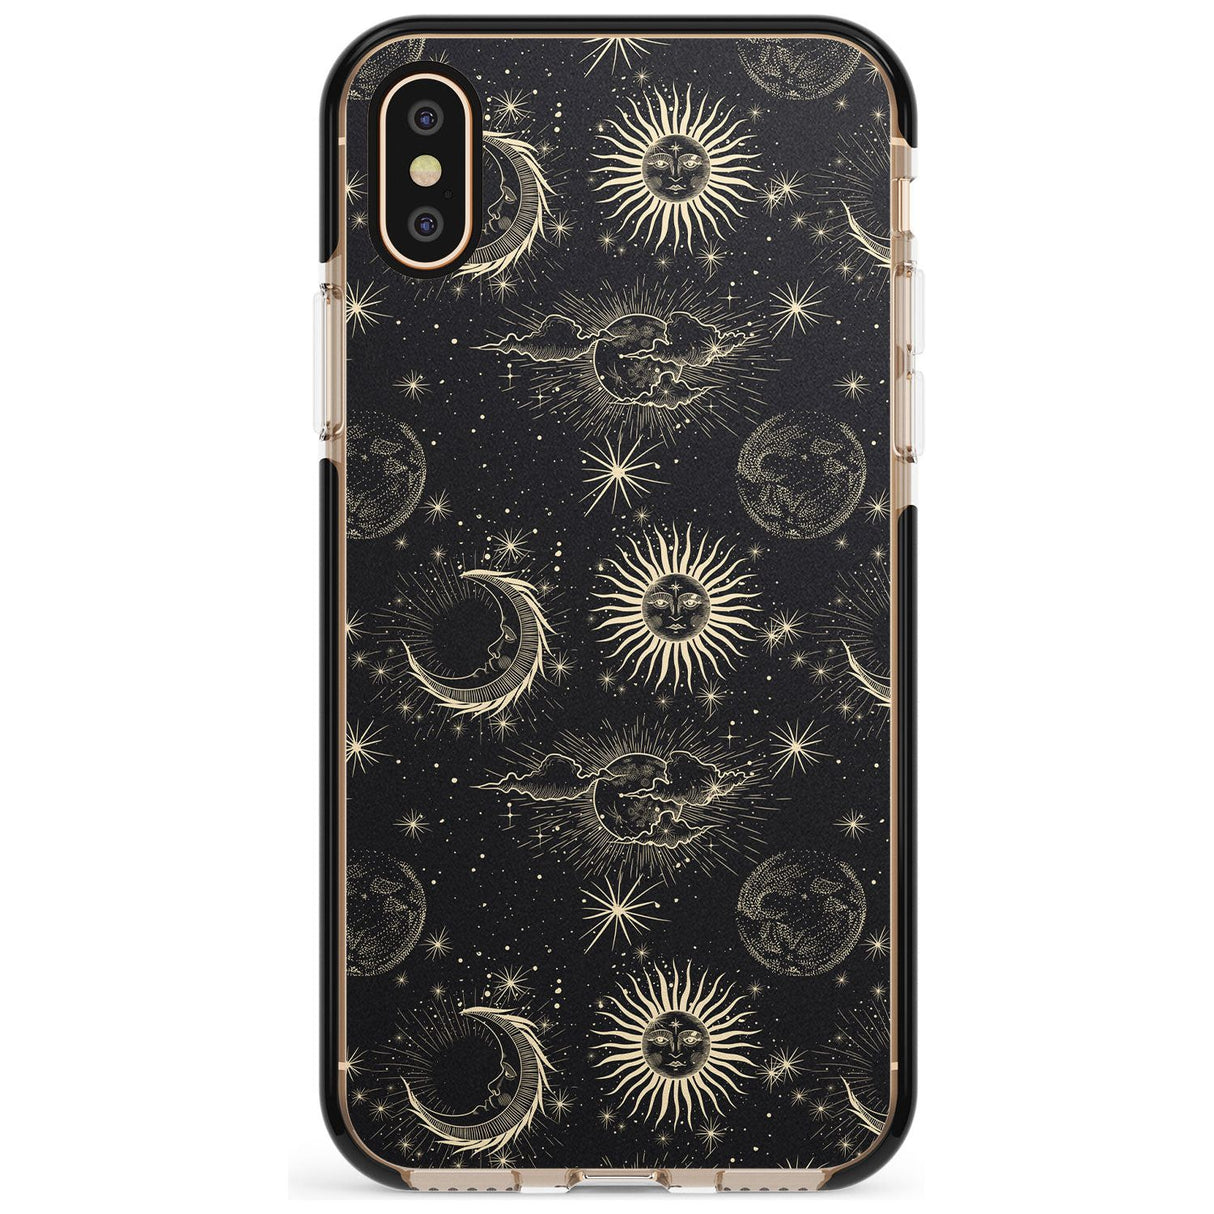 Large Suns, Moons & Clouds Pink Fade Impact Phone Case for iPhone X XS Max XR